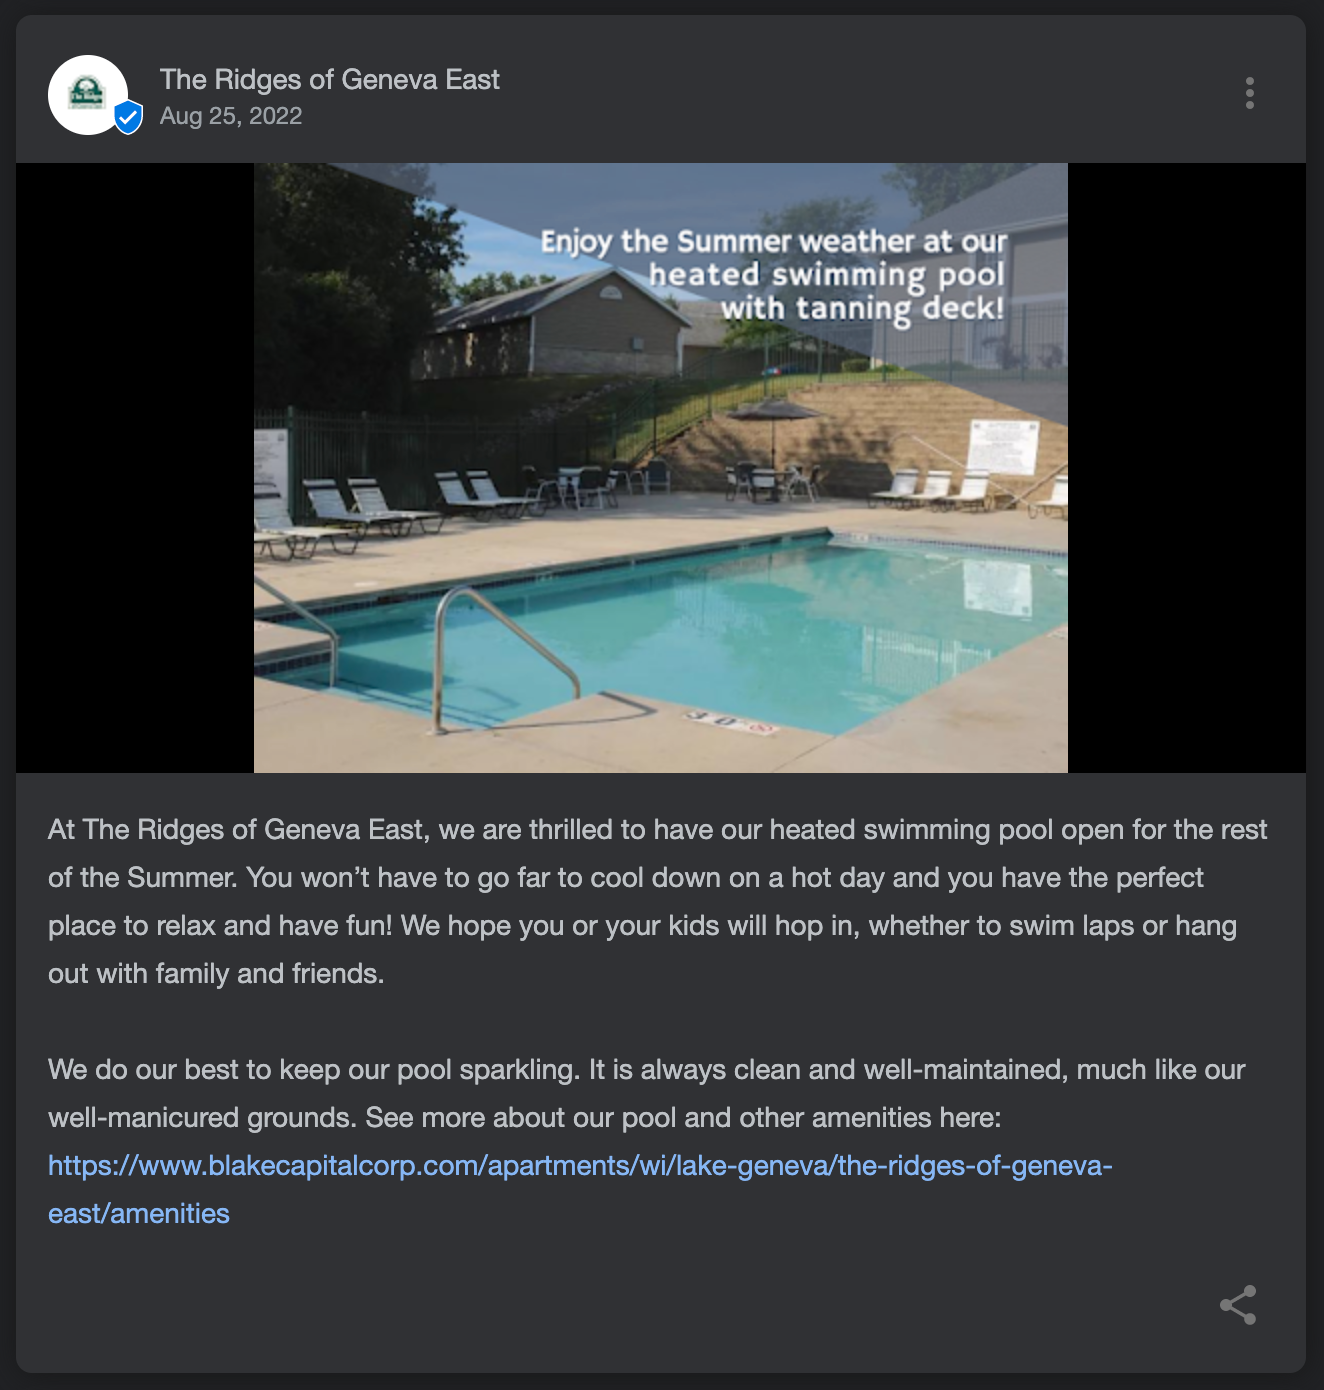 A screenshot of a Google Business Profile post advertising apartment amenity